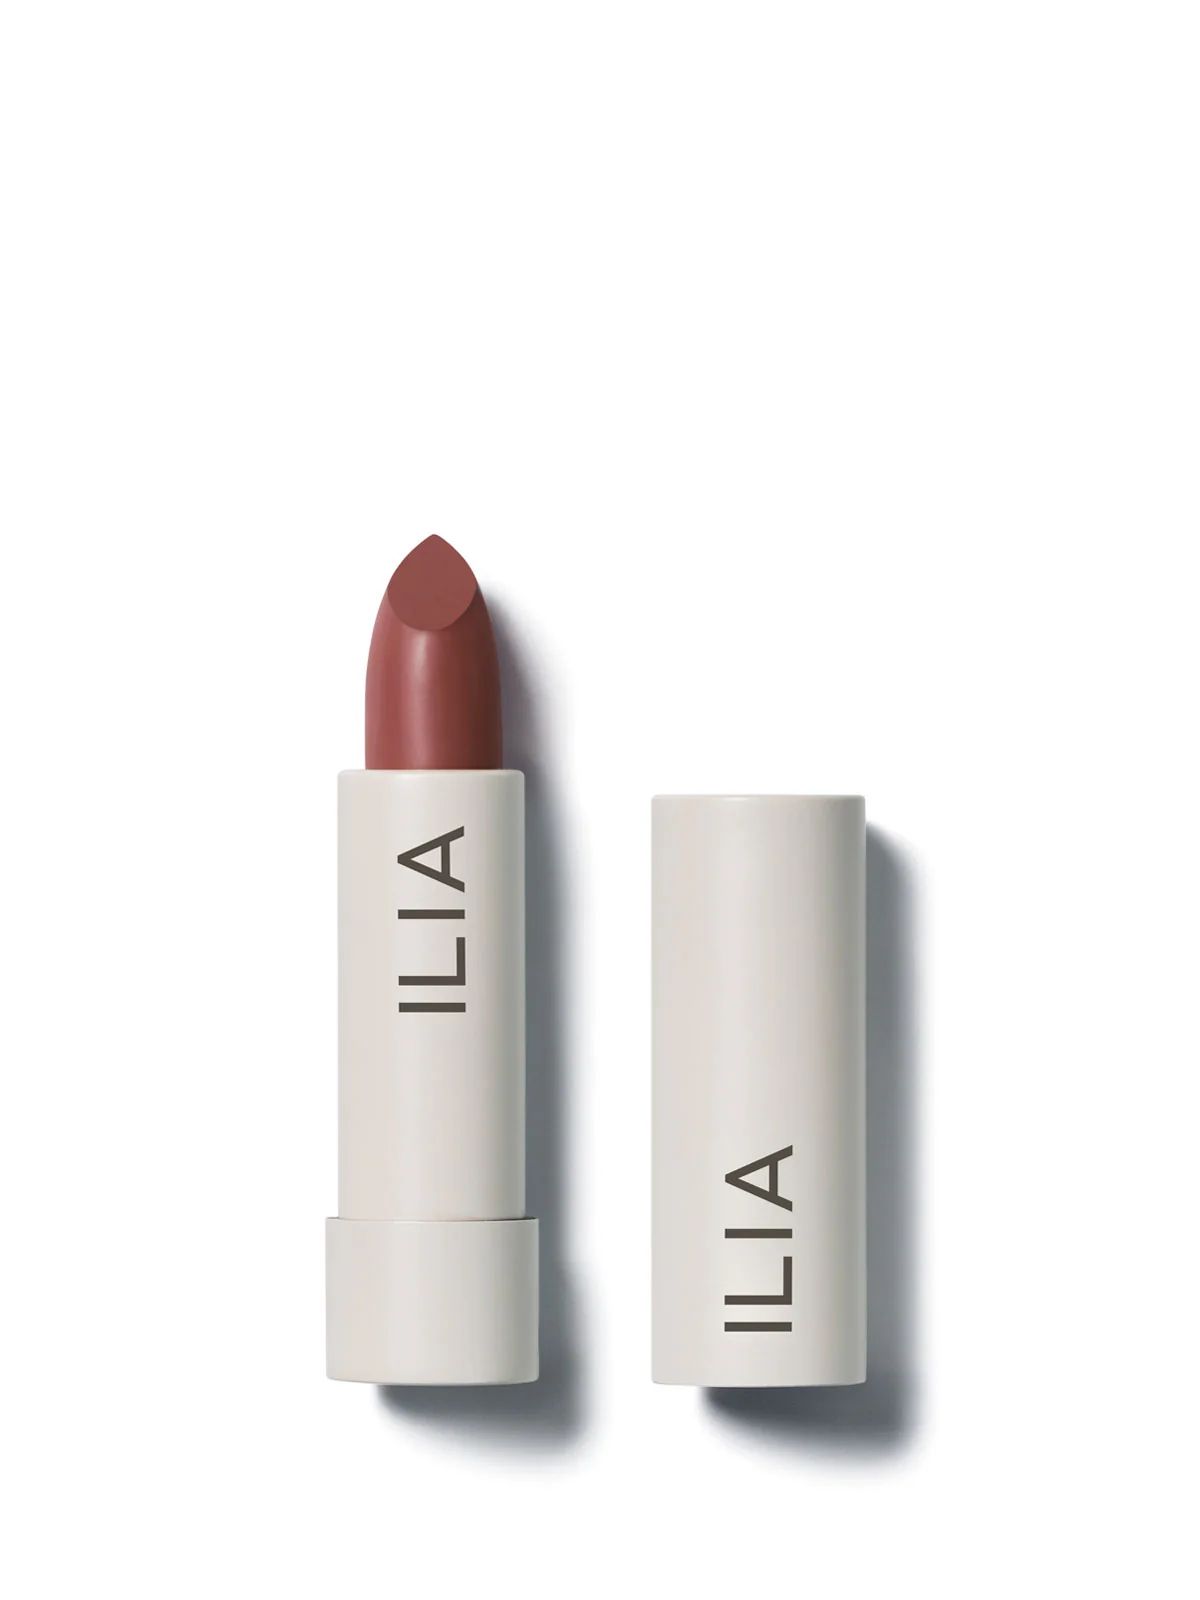 ILIA Tinted Lip Conditioner - Forever - 0.14 oz | 4 g - Clean, Natural Lip Treatment With Soft Color | ILIA Beauty